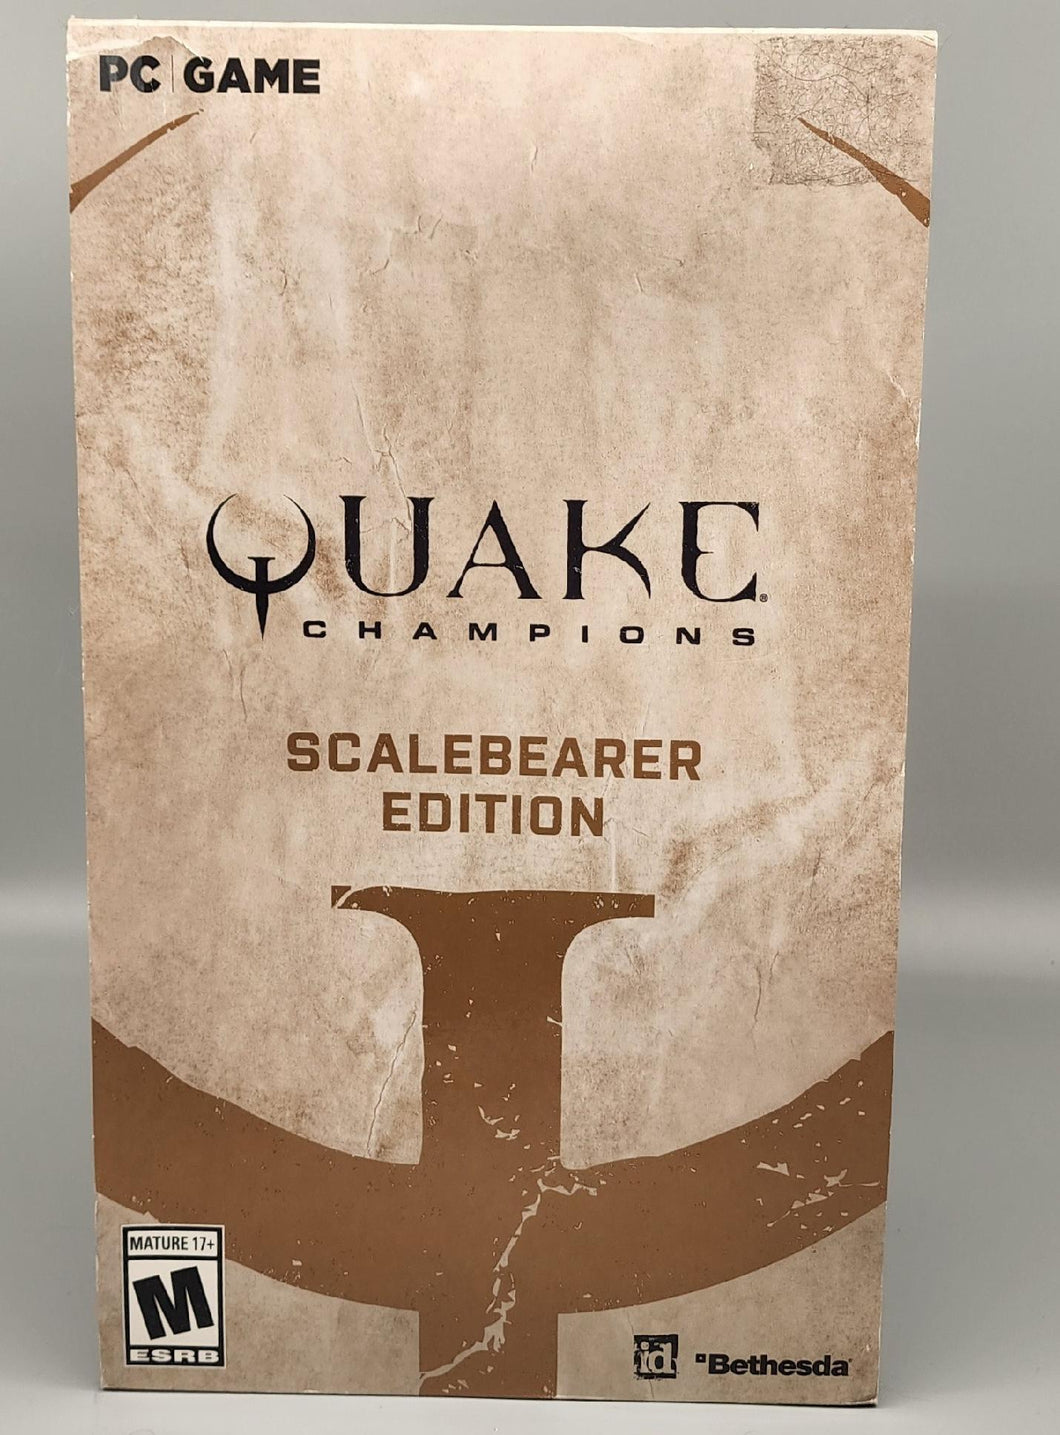 Quake Champions: Scalebearer Edition PC Game and 12